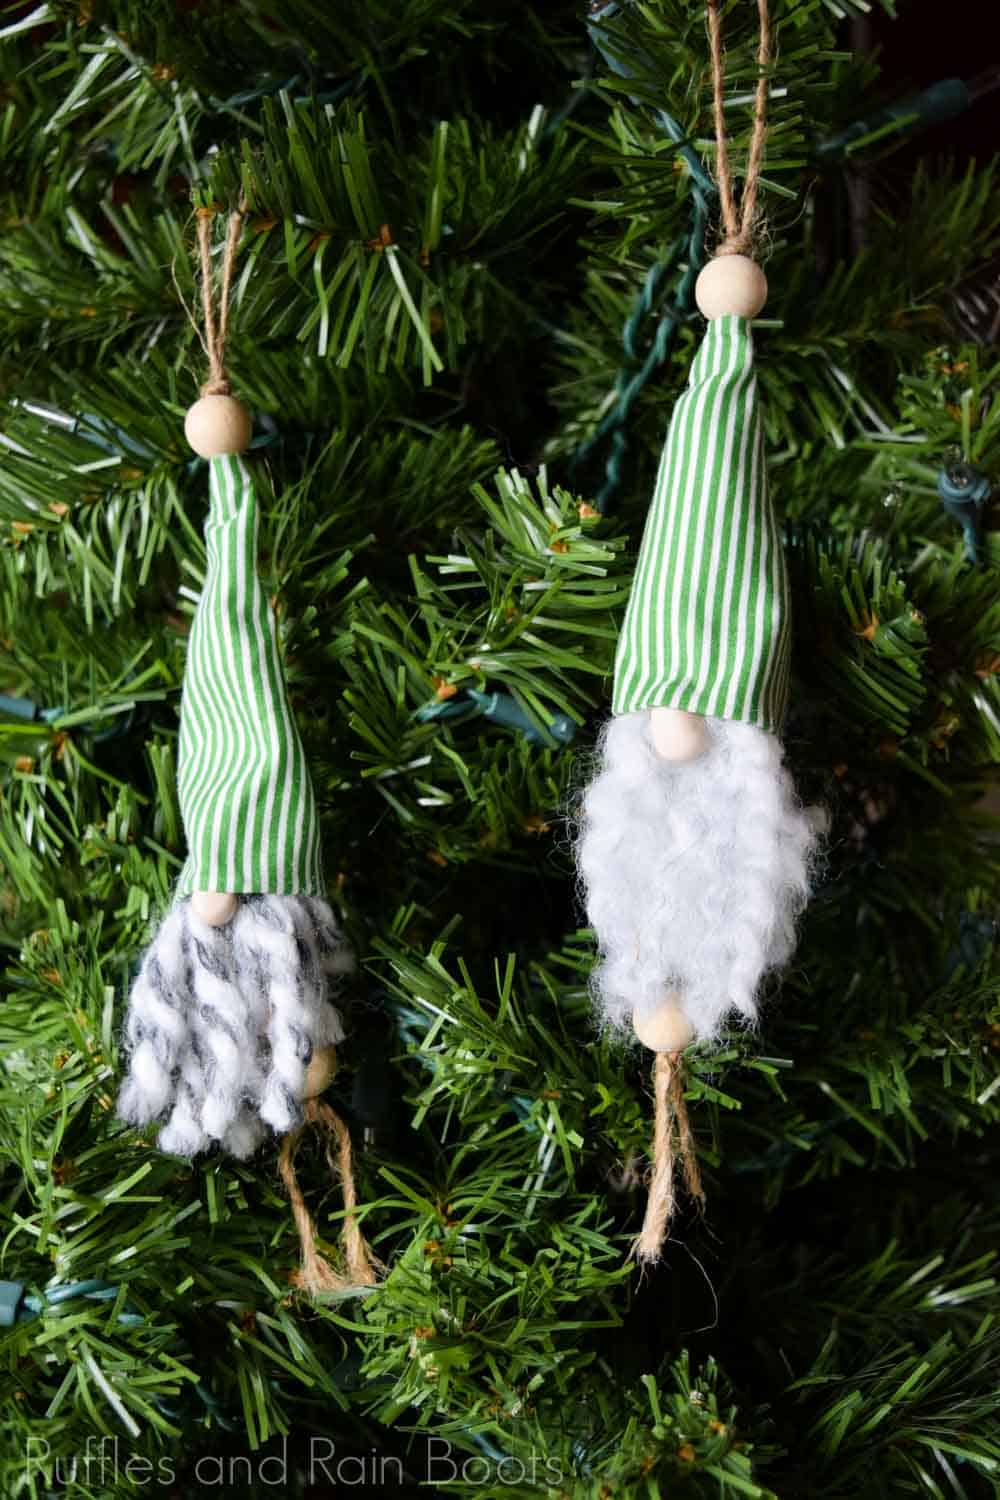 Vertical image showing two gnome ornaments with yarn beards with green striped hats and wood bead noses hung on a small Christmas tree.